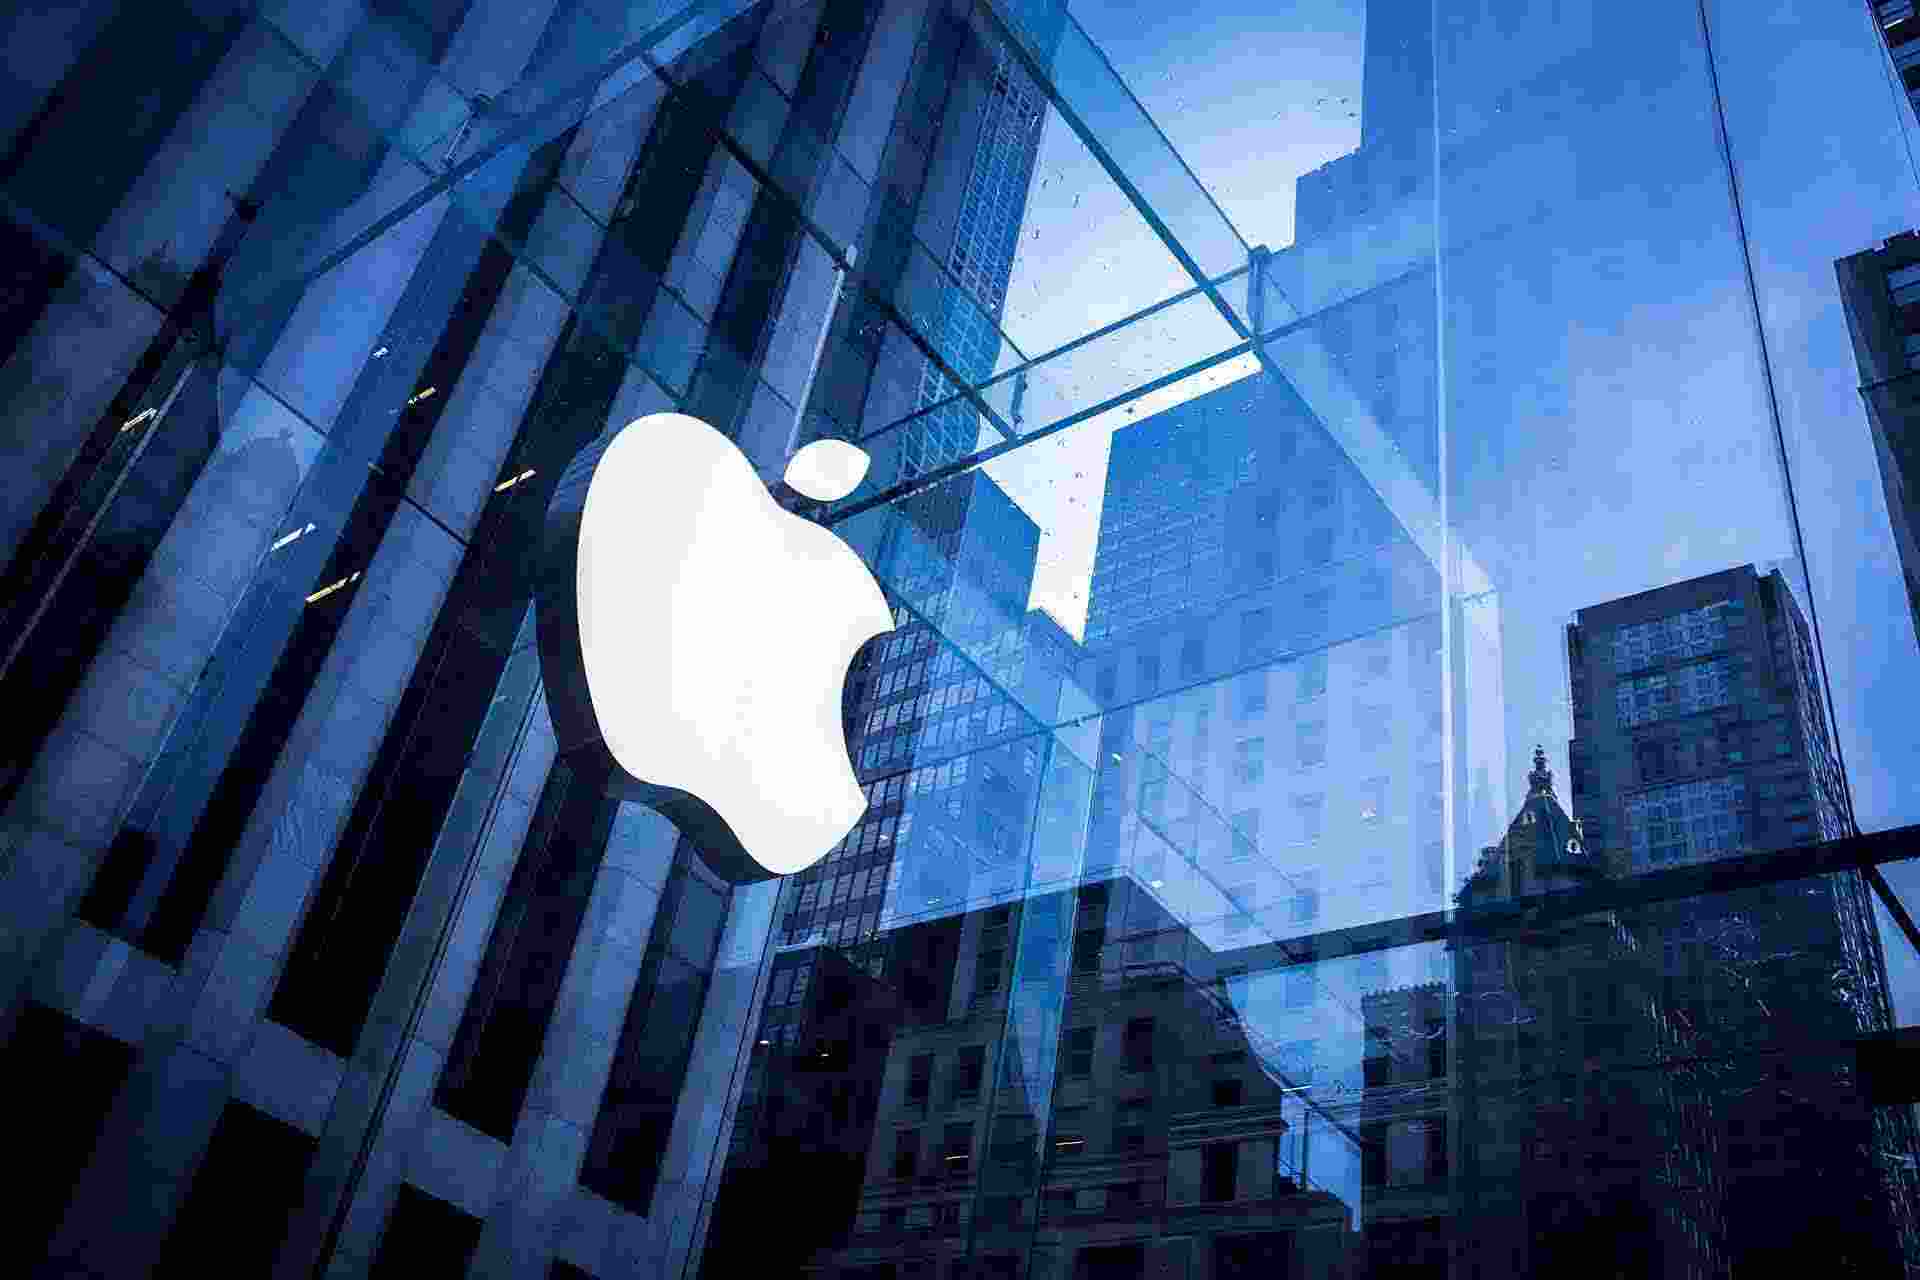 Tech giant Apple Inc. has faced a historic antitrust fine of over 1.8 billion euros ($1.95 billion) from the European Union on Monday, marking its first-ever penalty of this magnitude.